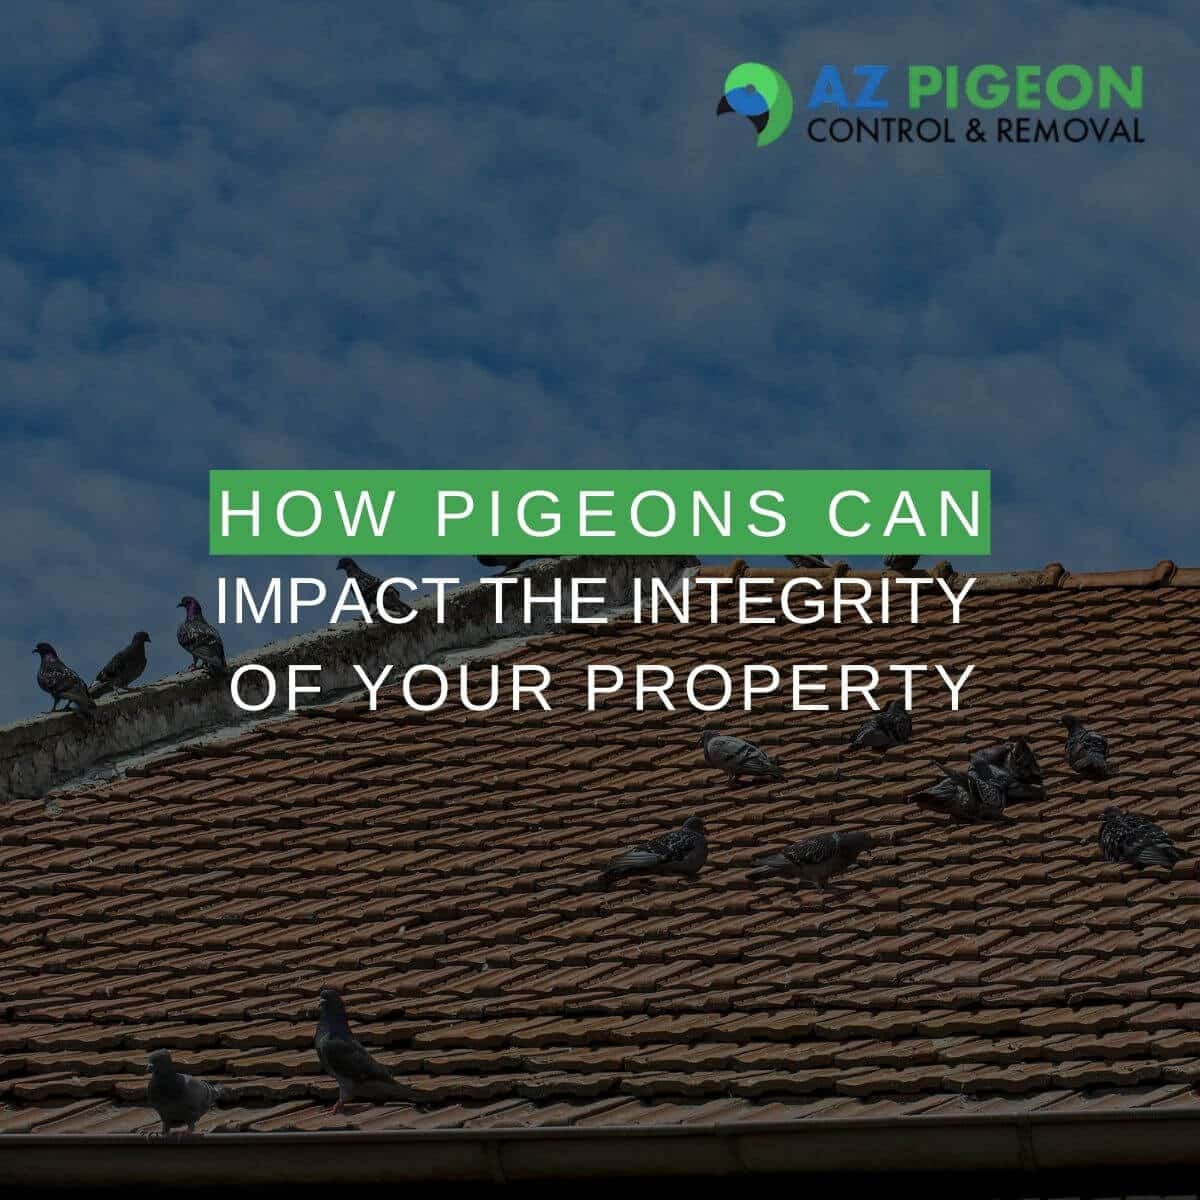 How Pigeons Can Impact the Integrity of Your Property